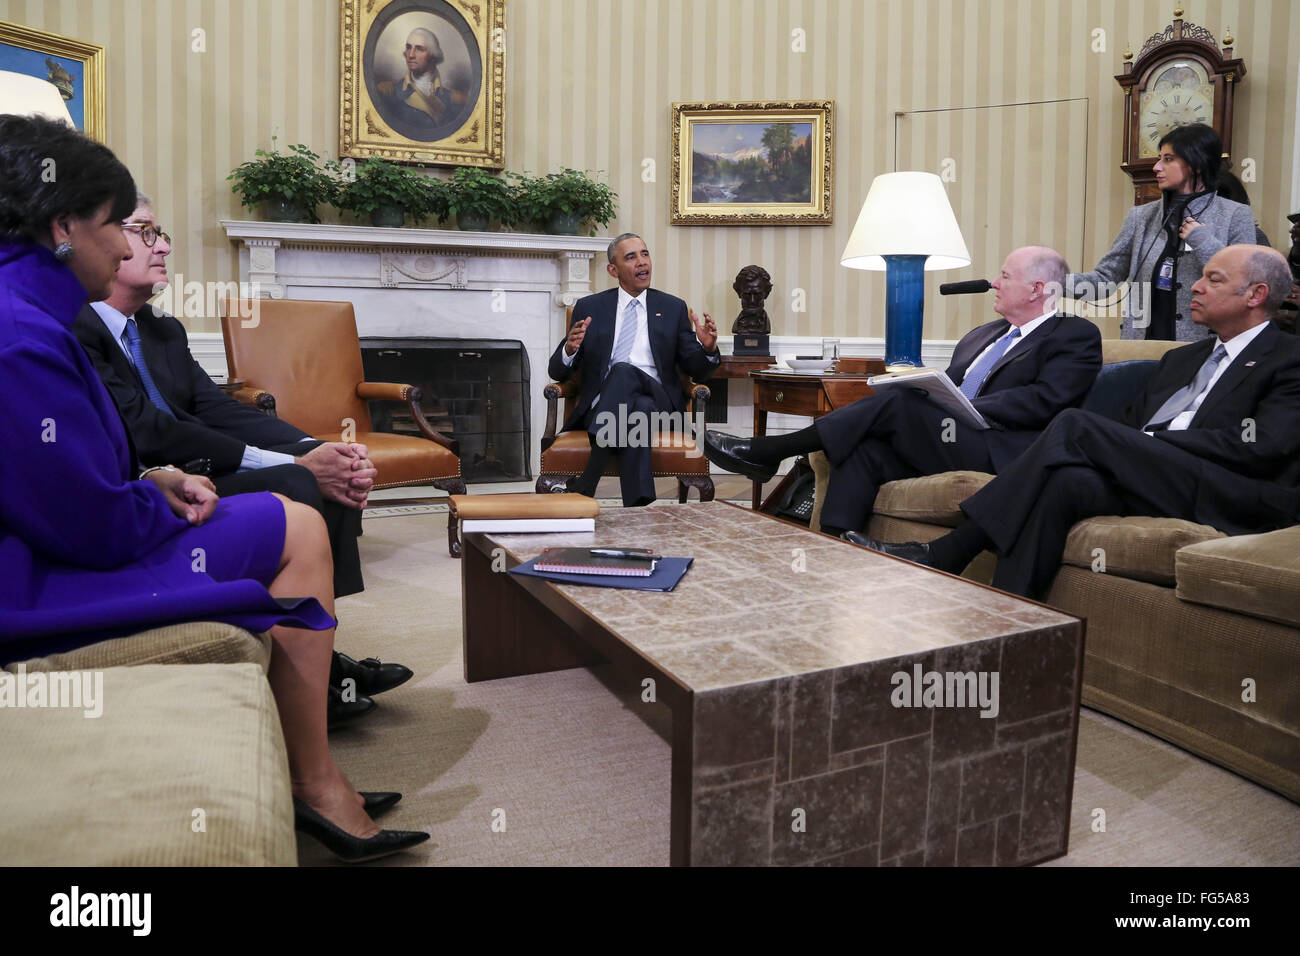 Washington DC, USA. 17th February, 2016.  United States President Barack Obama meets with former National Security Advisor Tom Donilon (2R) and former IBM CEO Sam Palmisano (2L), who are being appointed as the Chair and Vice Chair respectively of the Commission on Enhancing National Cybersecurity in the Oval Office of the White House, in Washington, DC, February 17, 2016. Also present during this meeting are Commerce Secretary Penny Pritzker (L) and Secretary of Homeland Security Jeh Johnson (R). Stock Photo